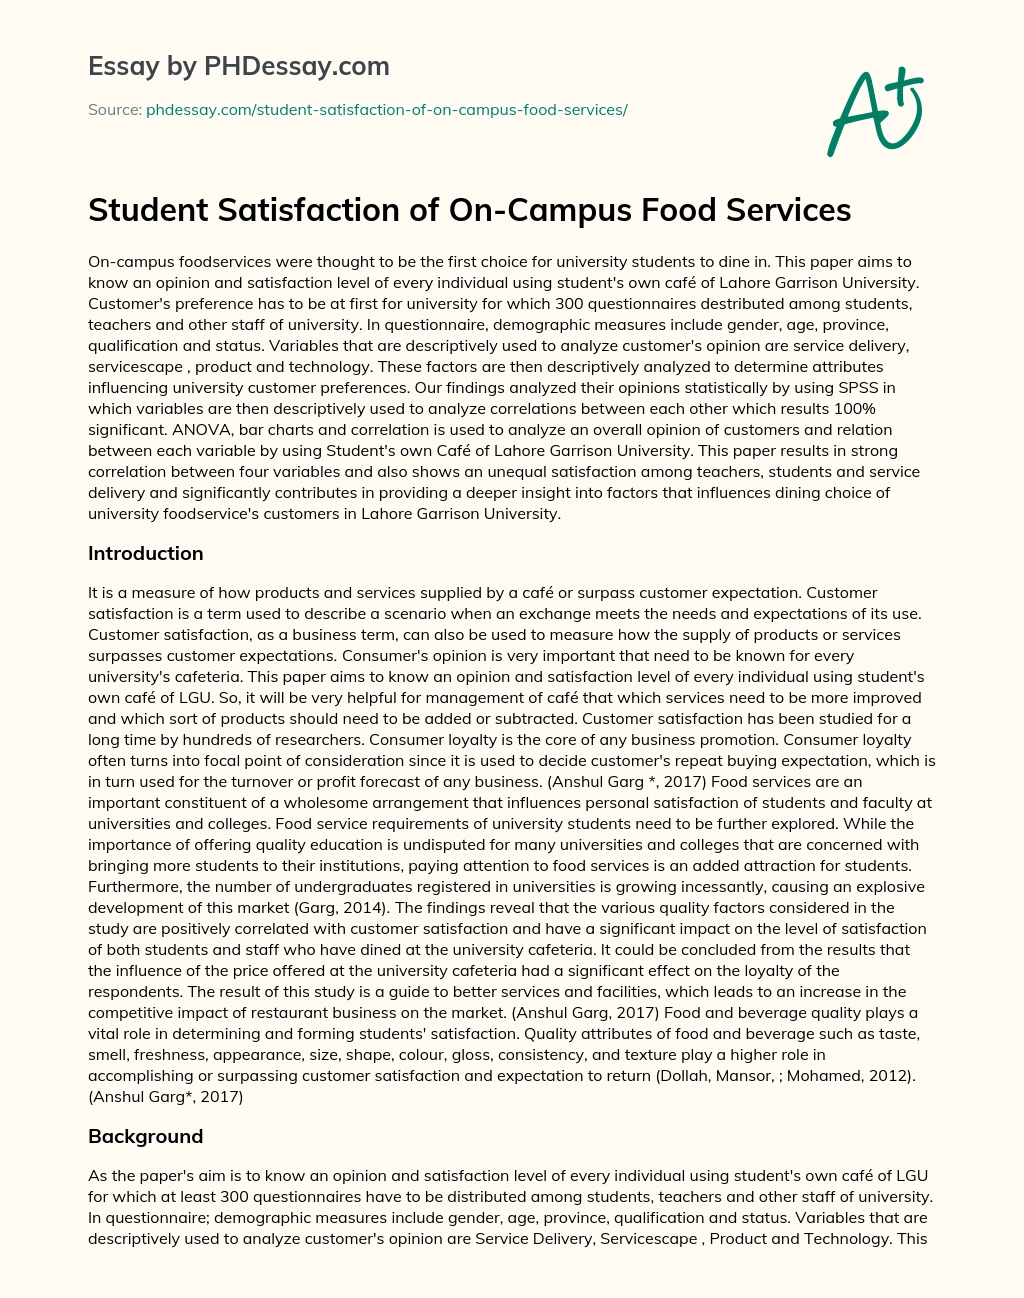 Student Satisfaction of On-Campus Food Services essay